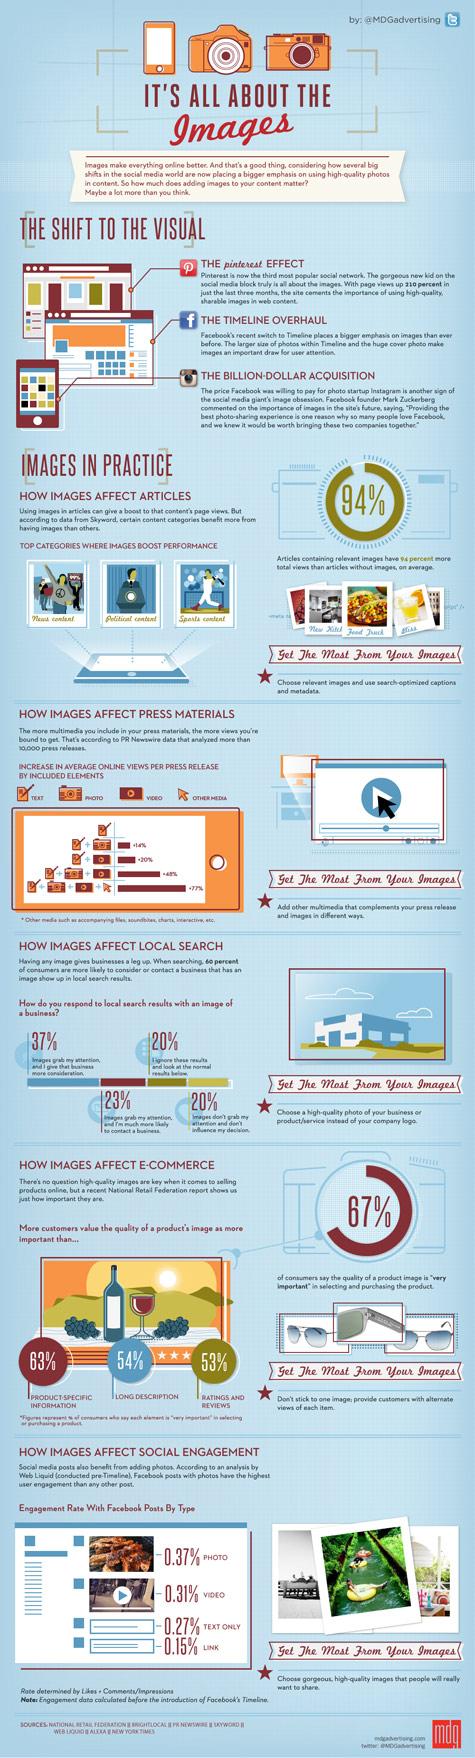 It’s All About the Images [infographic by MDG Advertising]